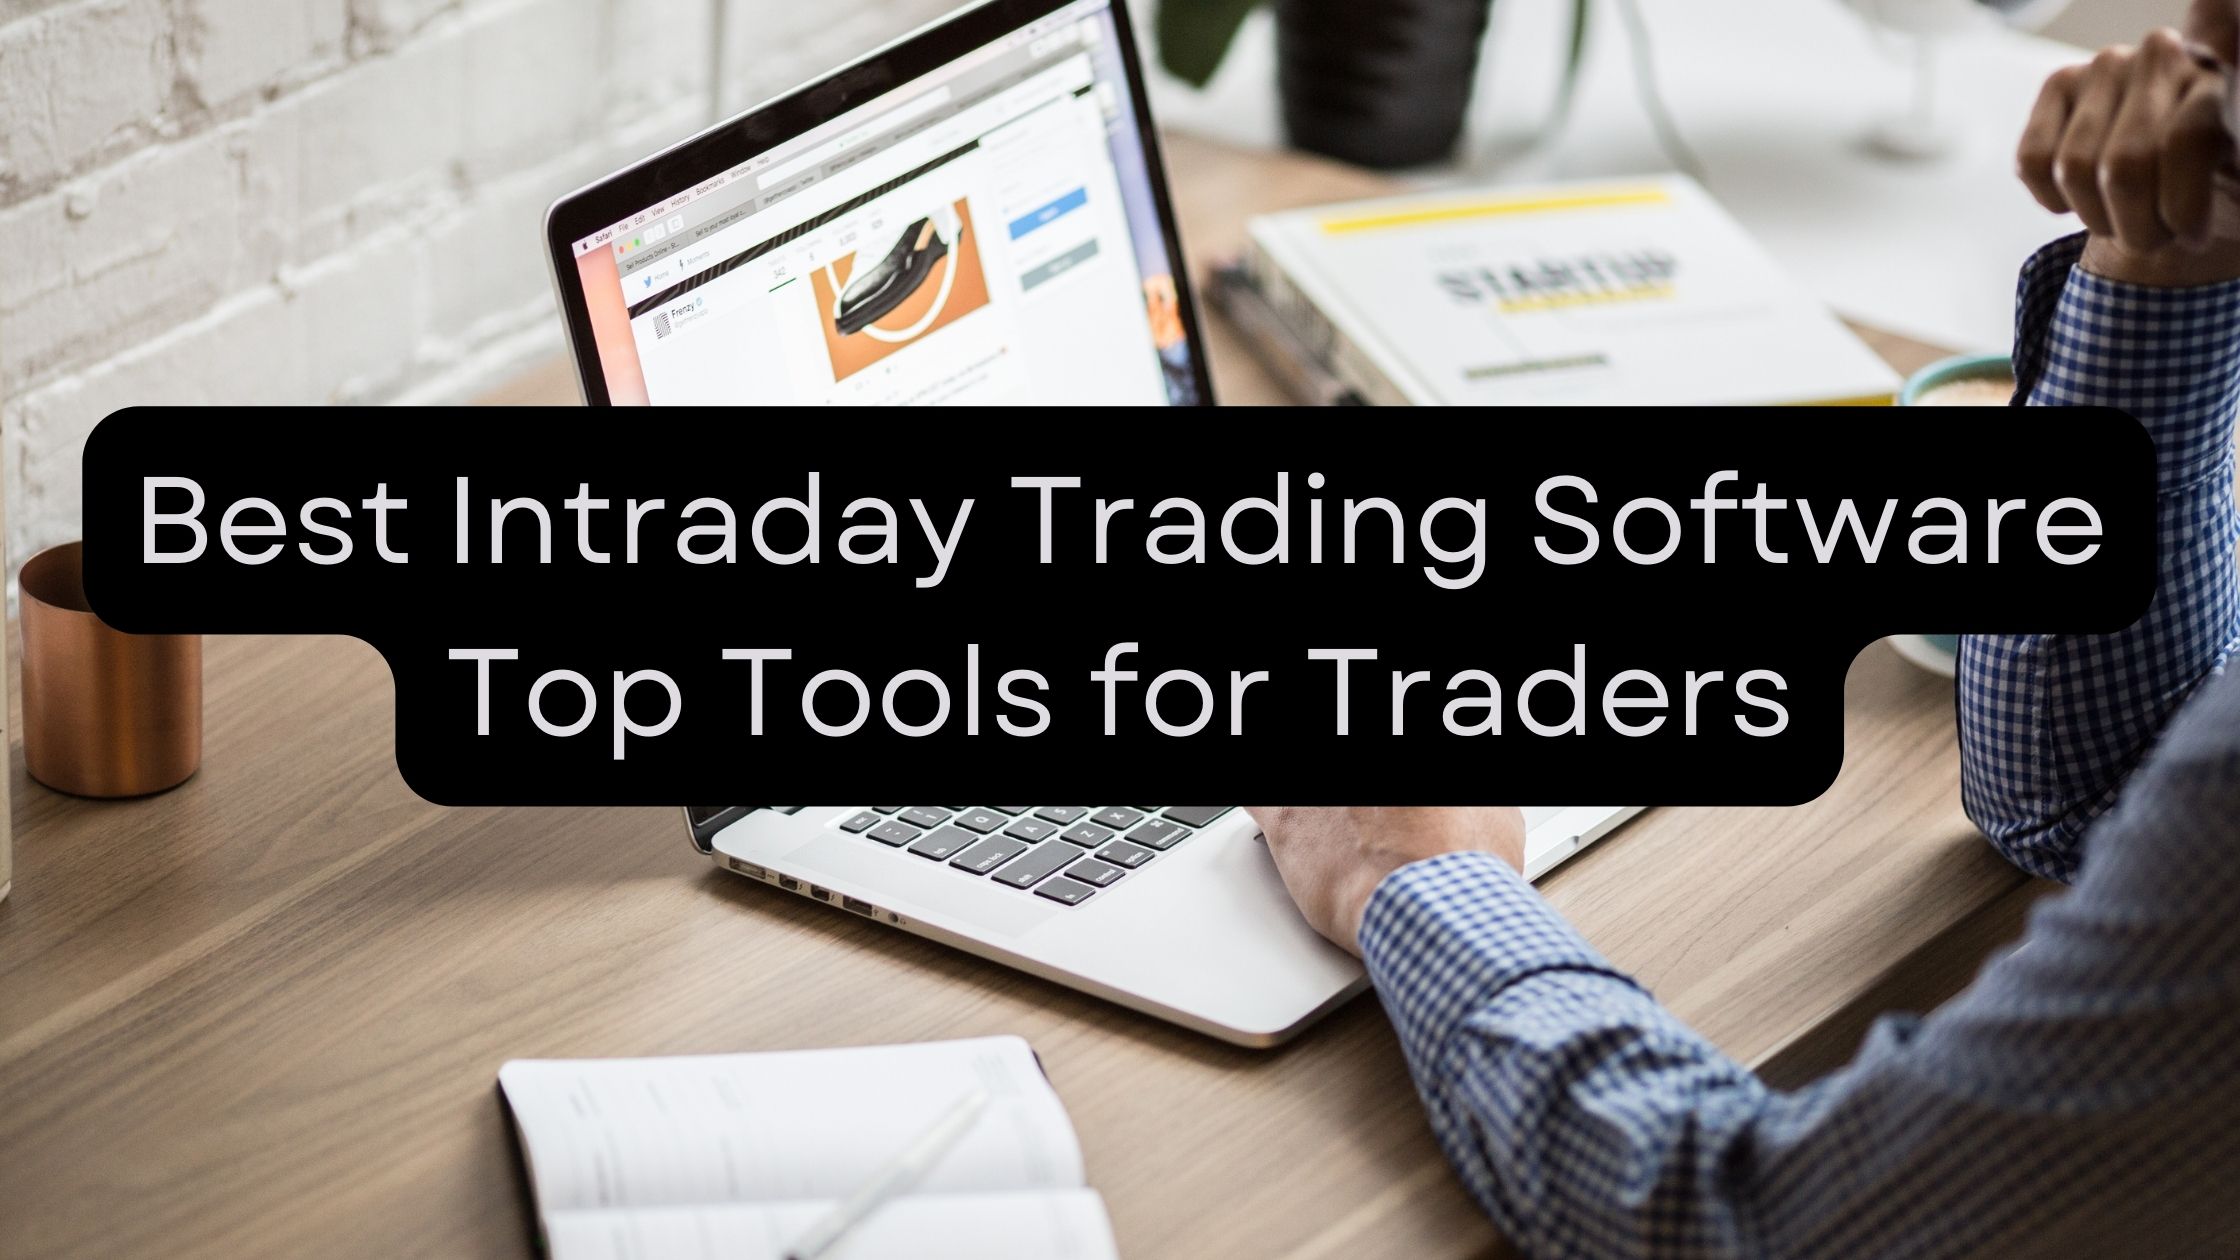 Intraday Trading Software